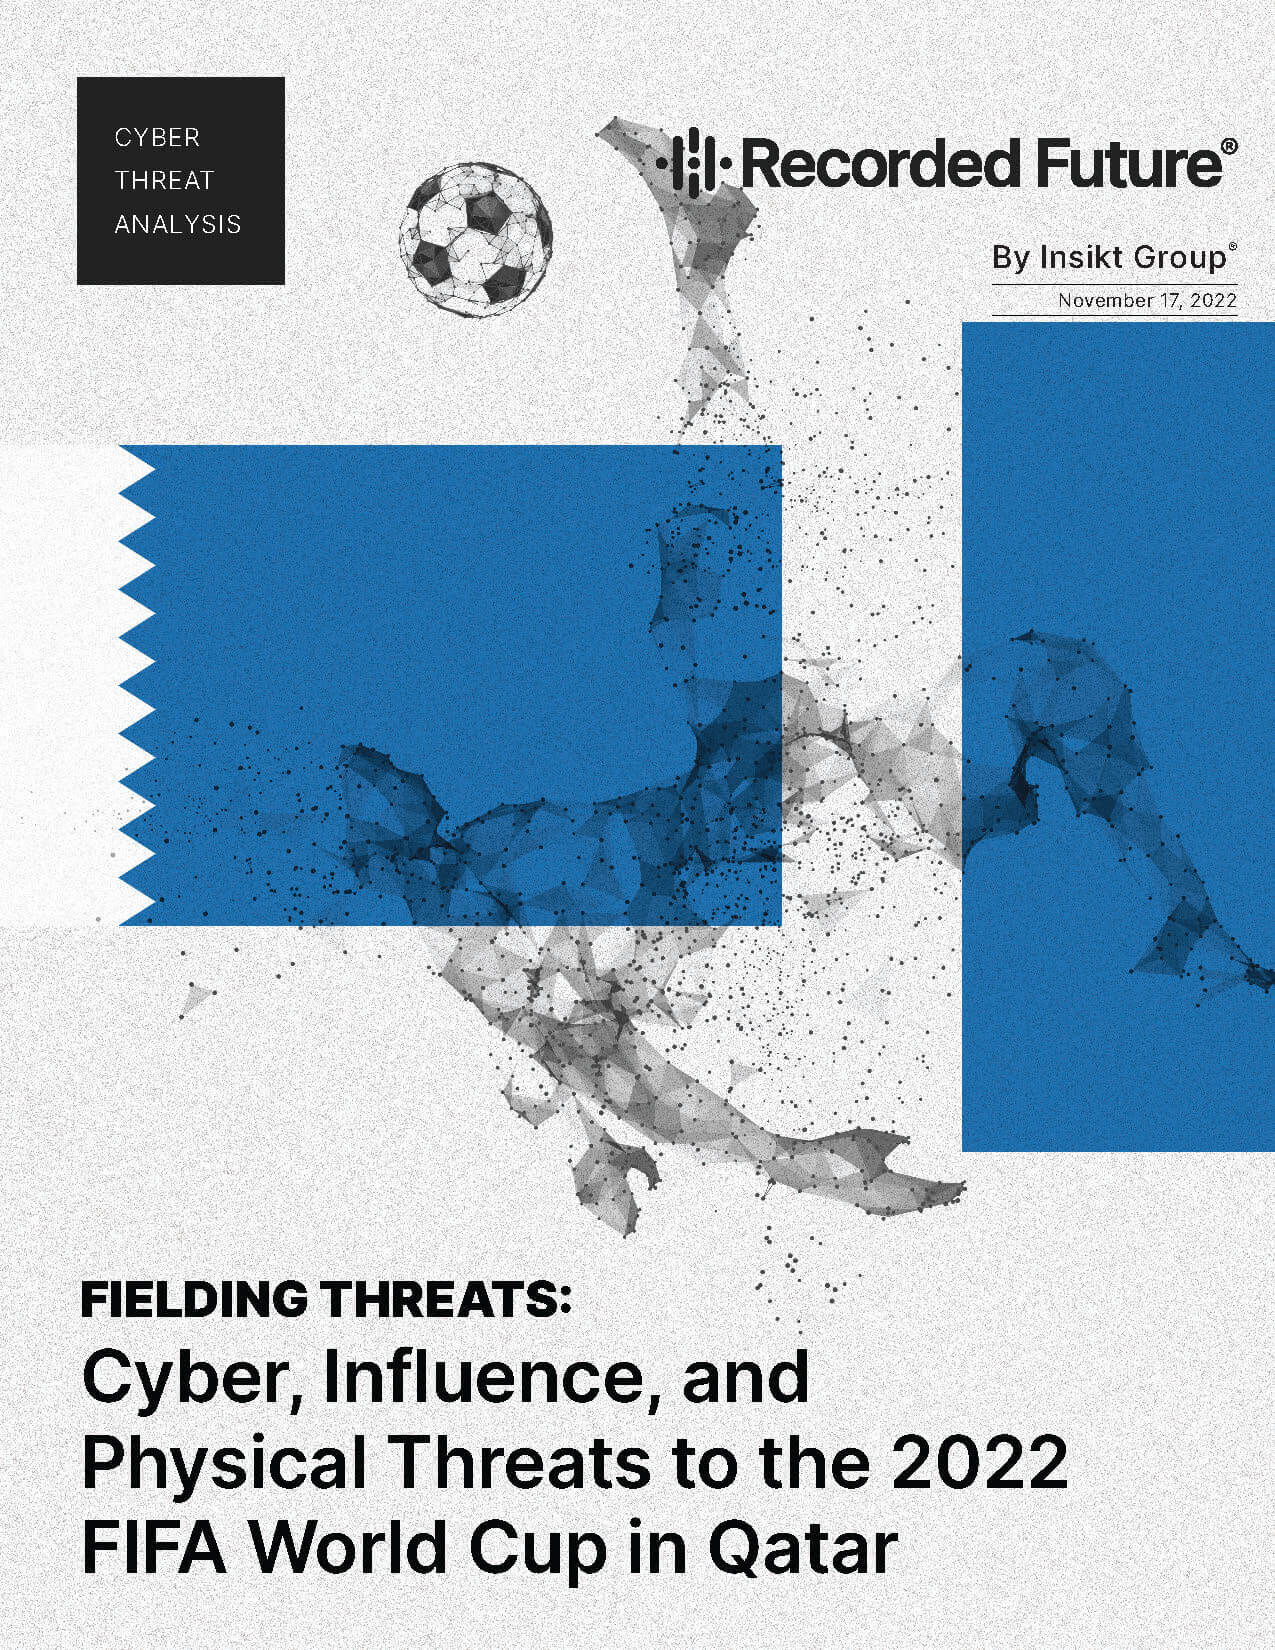 Fielding Threats: Cyber, Influence, and Physical Threats to the 2022 FIFA World Cup in Qatar